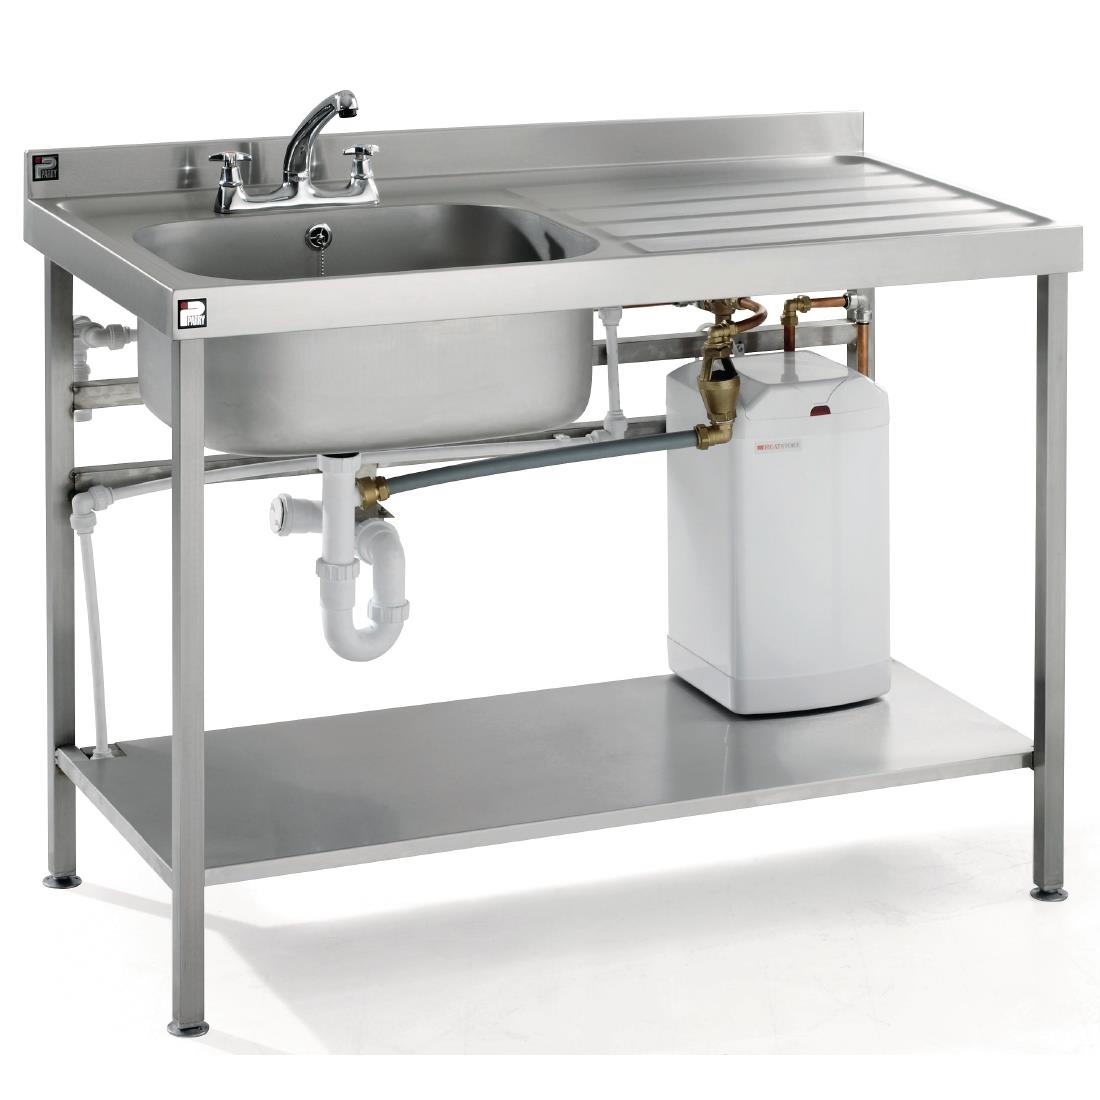 Parry Stainless Steel Fully Assembled Sink Right Hand Drainer 1200mm